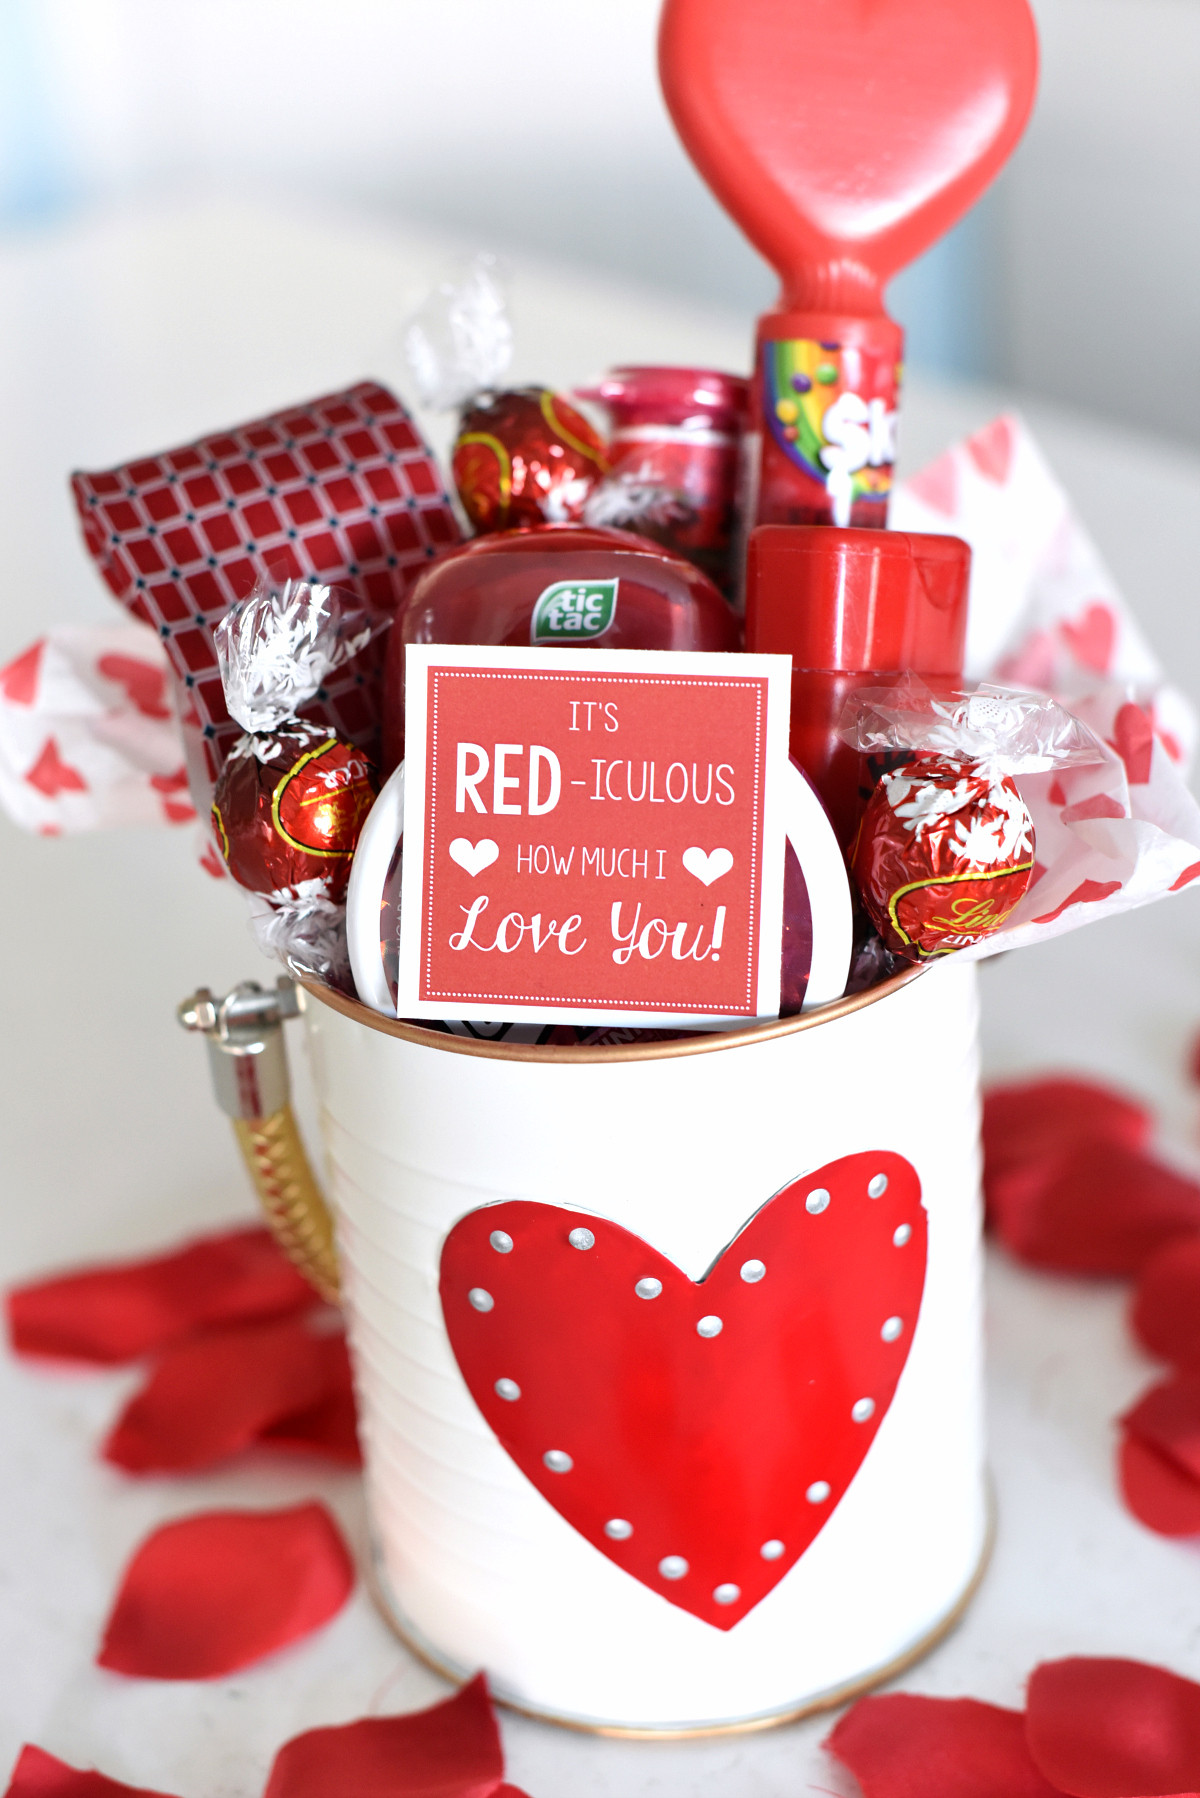 Valentine Gift Ideas For Husband
 Cute Valentine s Day Gift Idea RED iculous Basket